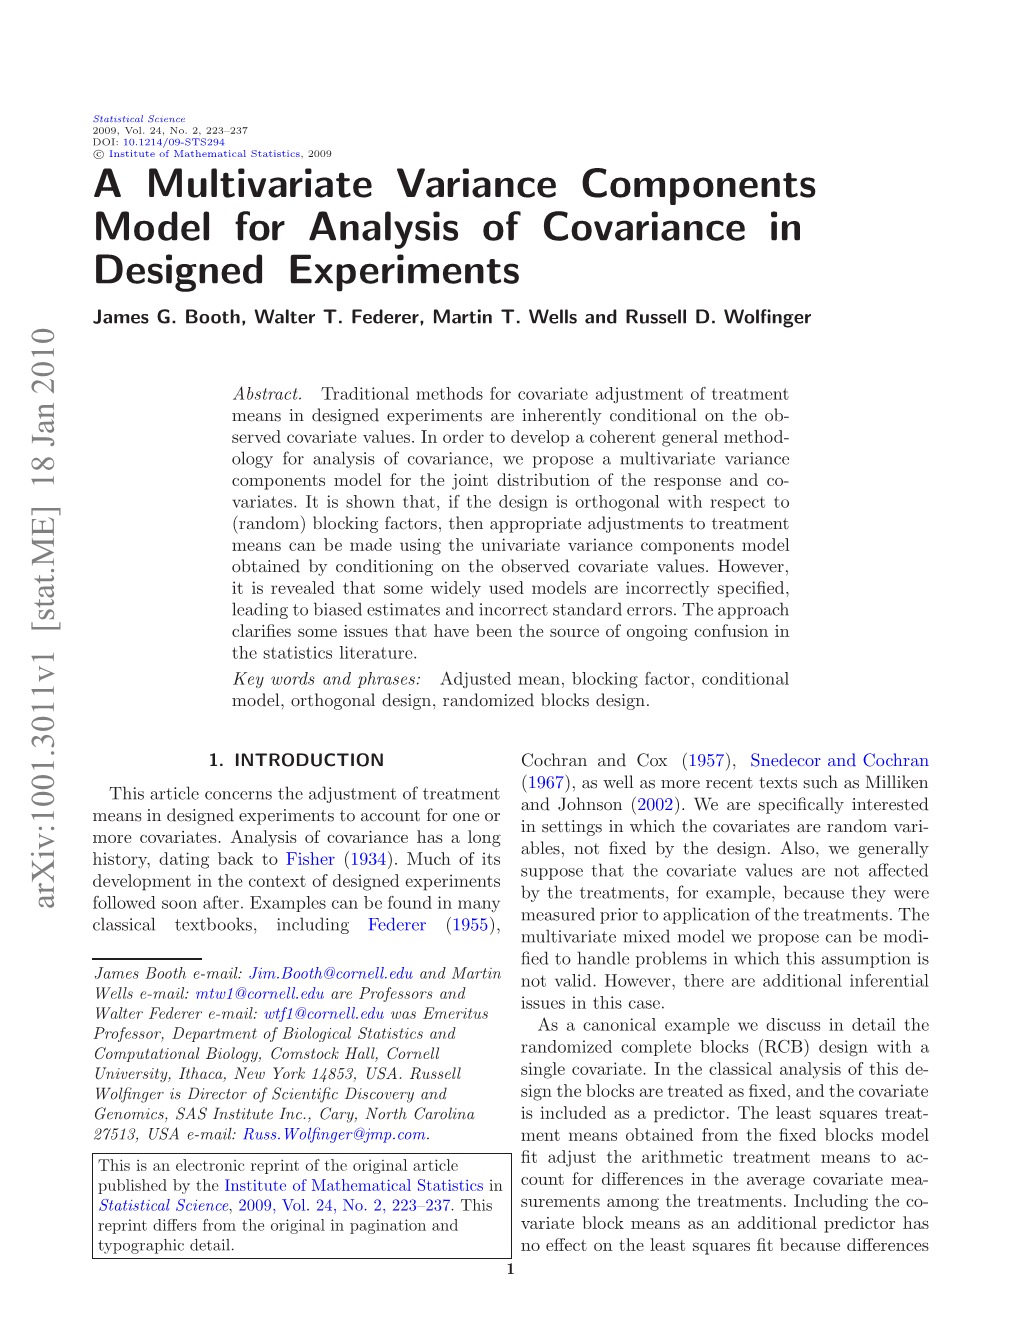 A Multivariate Variance Components Model for Analysis of Covariance In